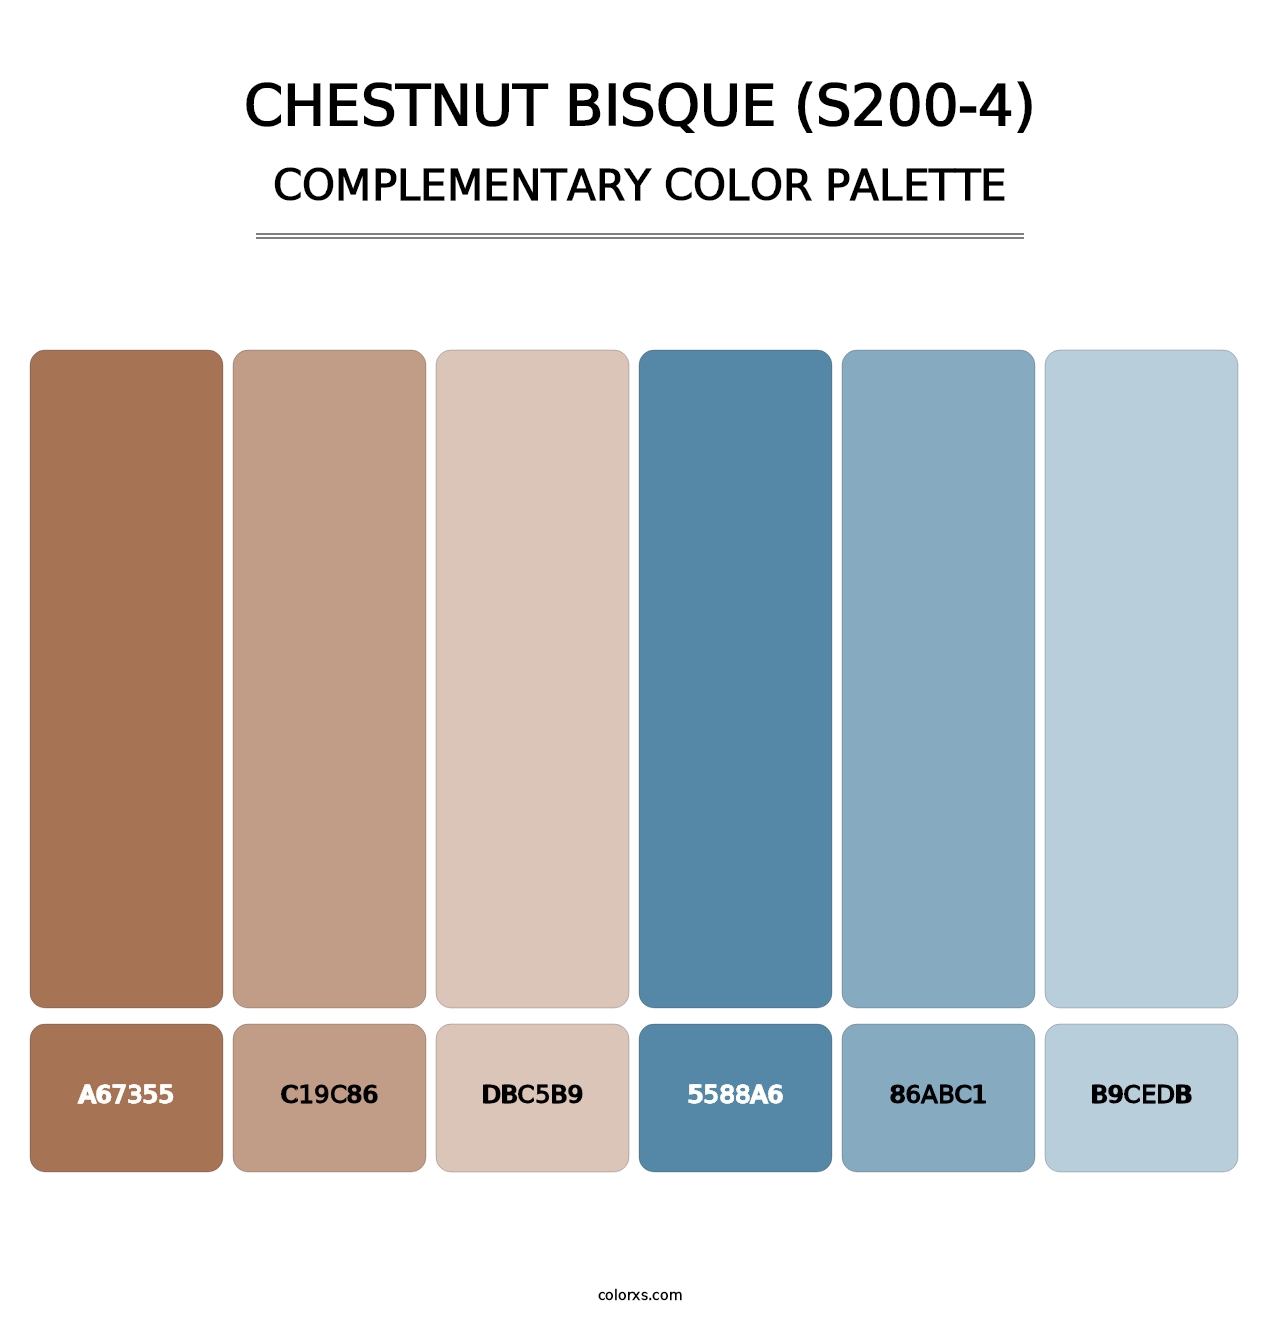 Chestnut Bisque (S200-4) - Complementary Color Palette